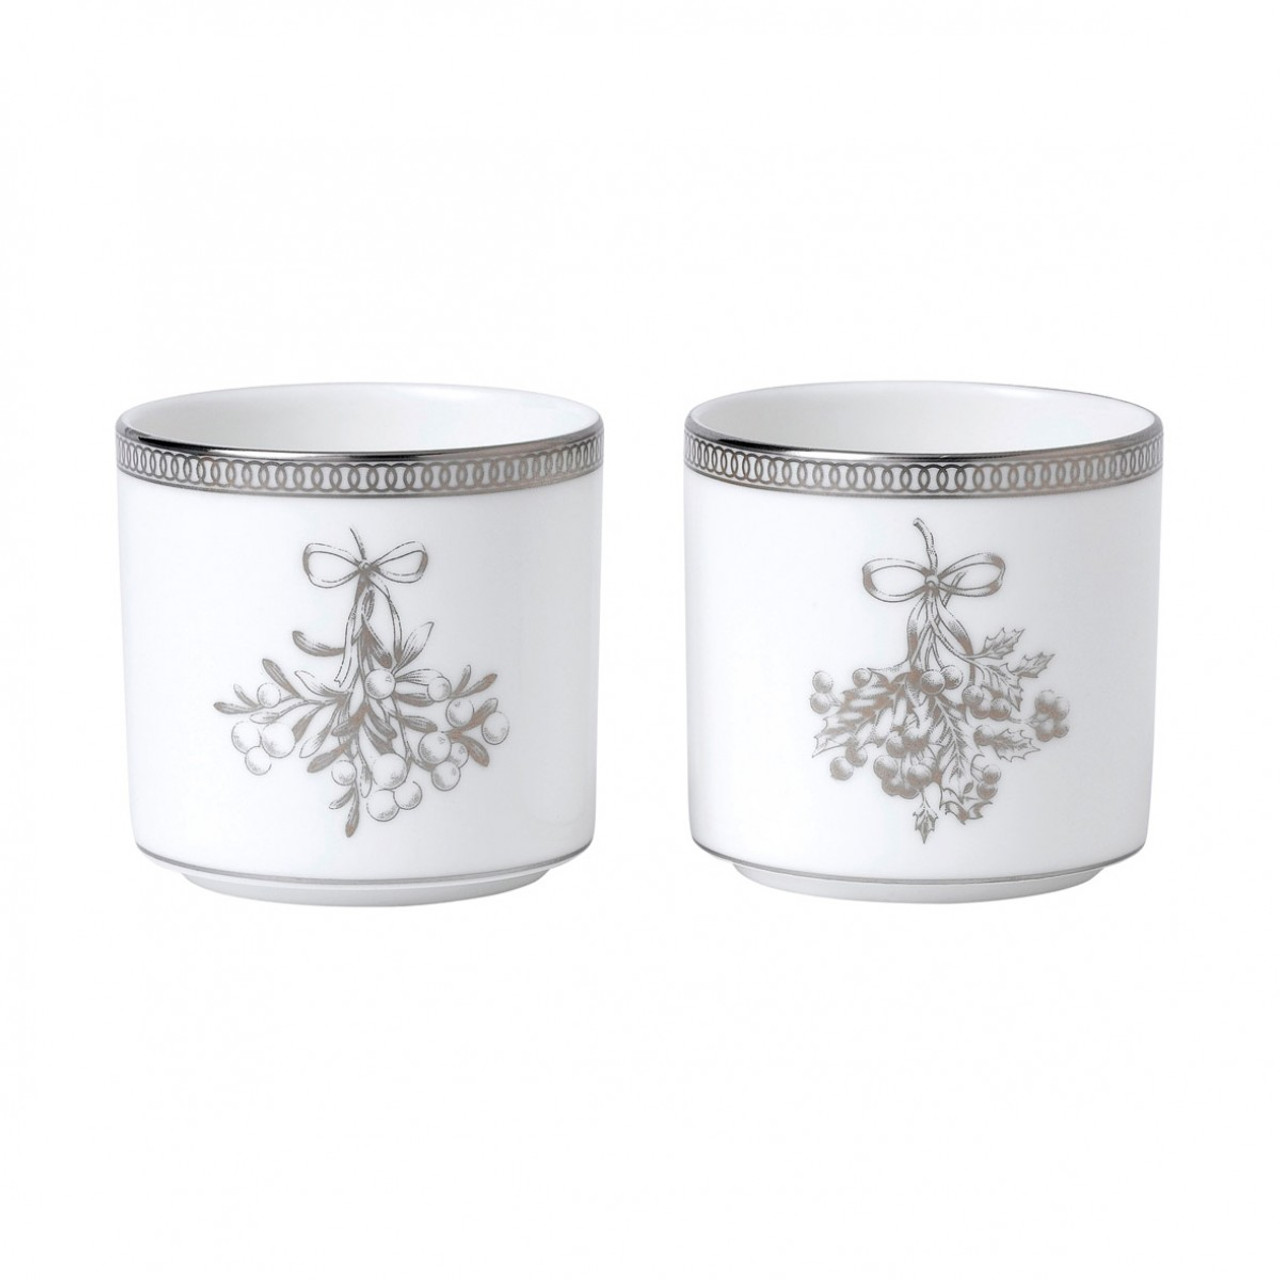 Wedgwood Winter White Votive Set of 2 by Wedgwood|The Lamp Stand